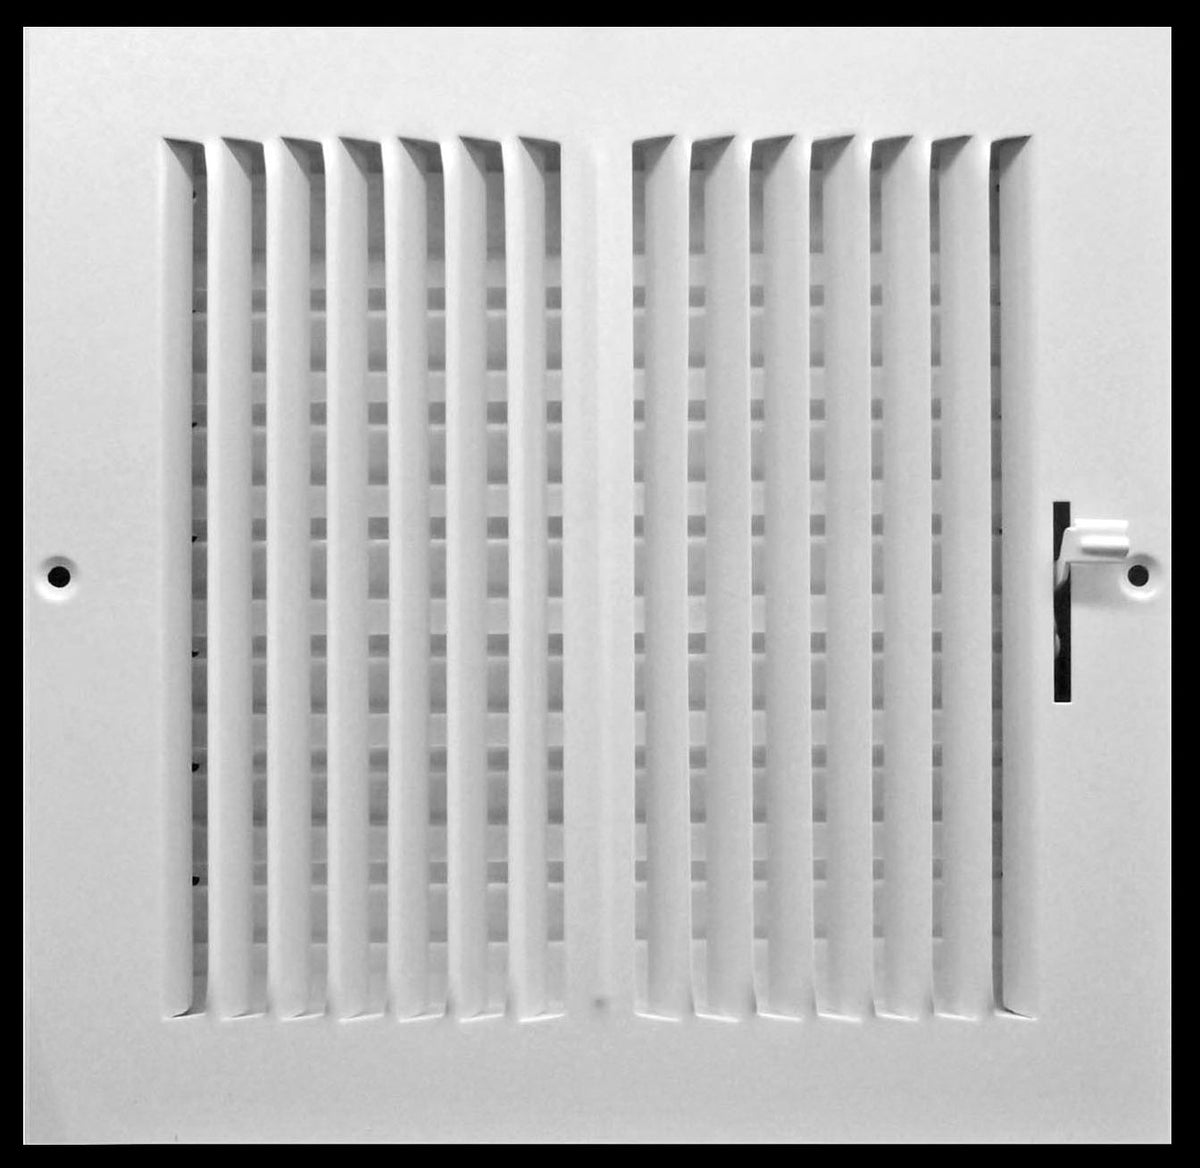 14&quot; X 14&quot; 2-Way Vertical AIR SUPPLY GRILLE - DUCT COVER &amp; DIFFUSER - Flat Stamped Face